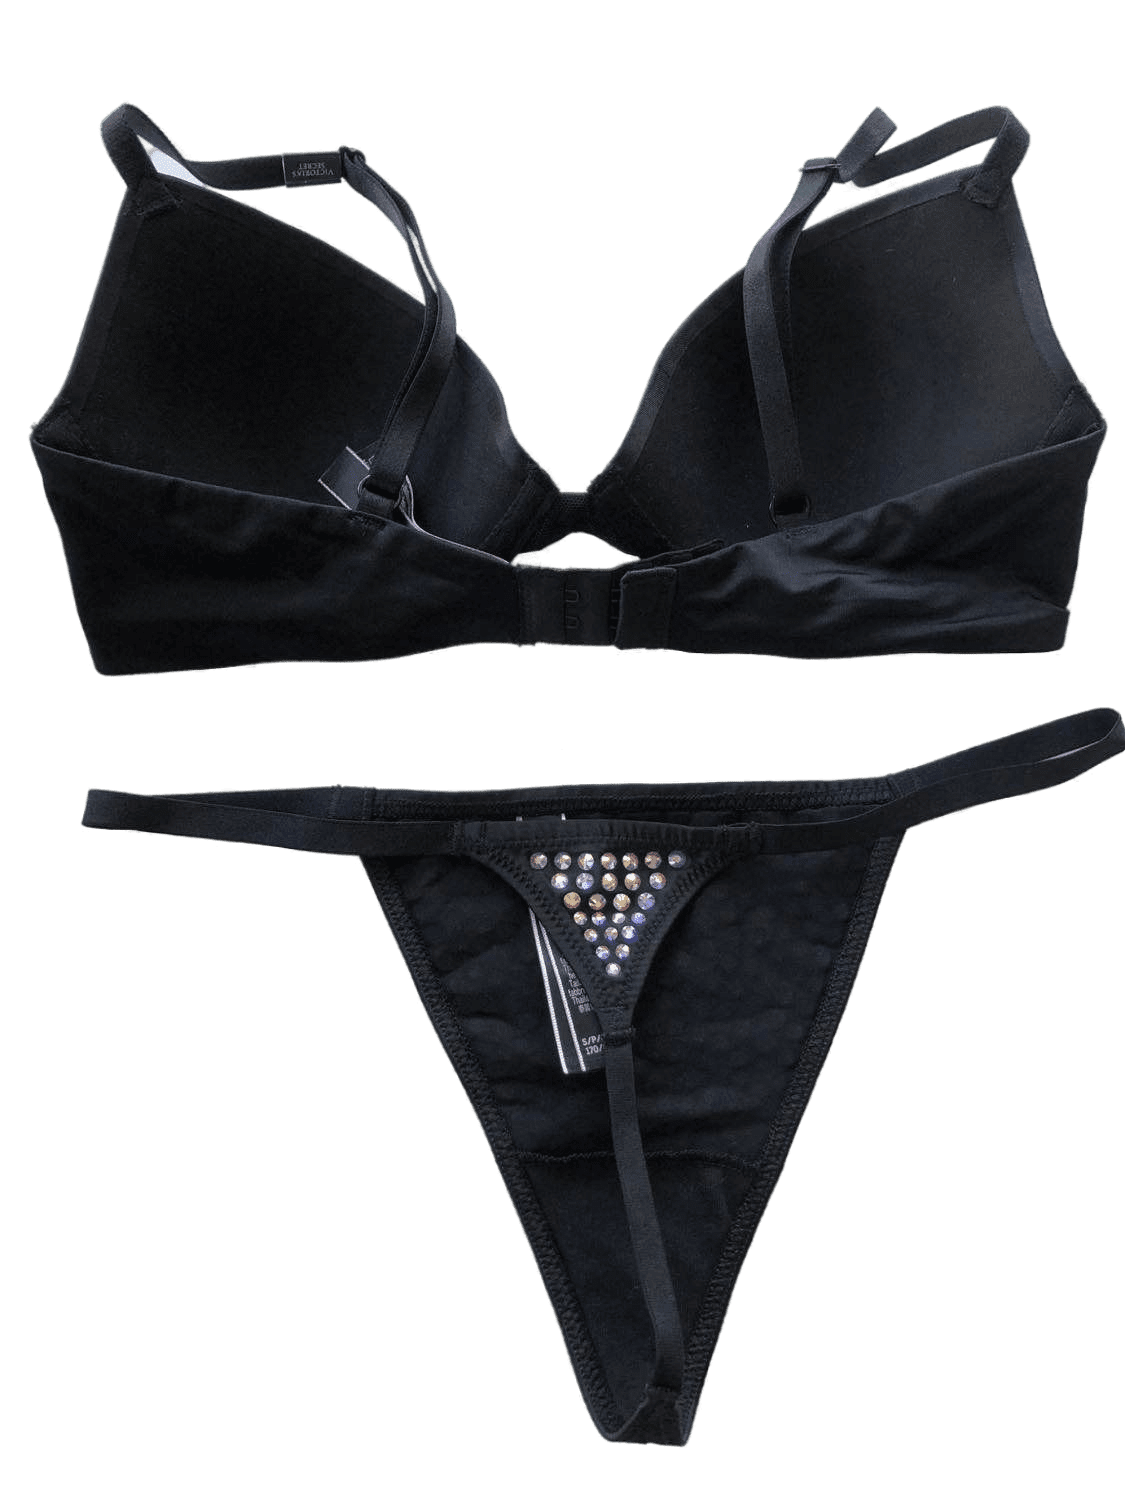 Victoria's Secret Very Sexy Embellished Low-cut Demi Bra and